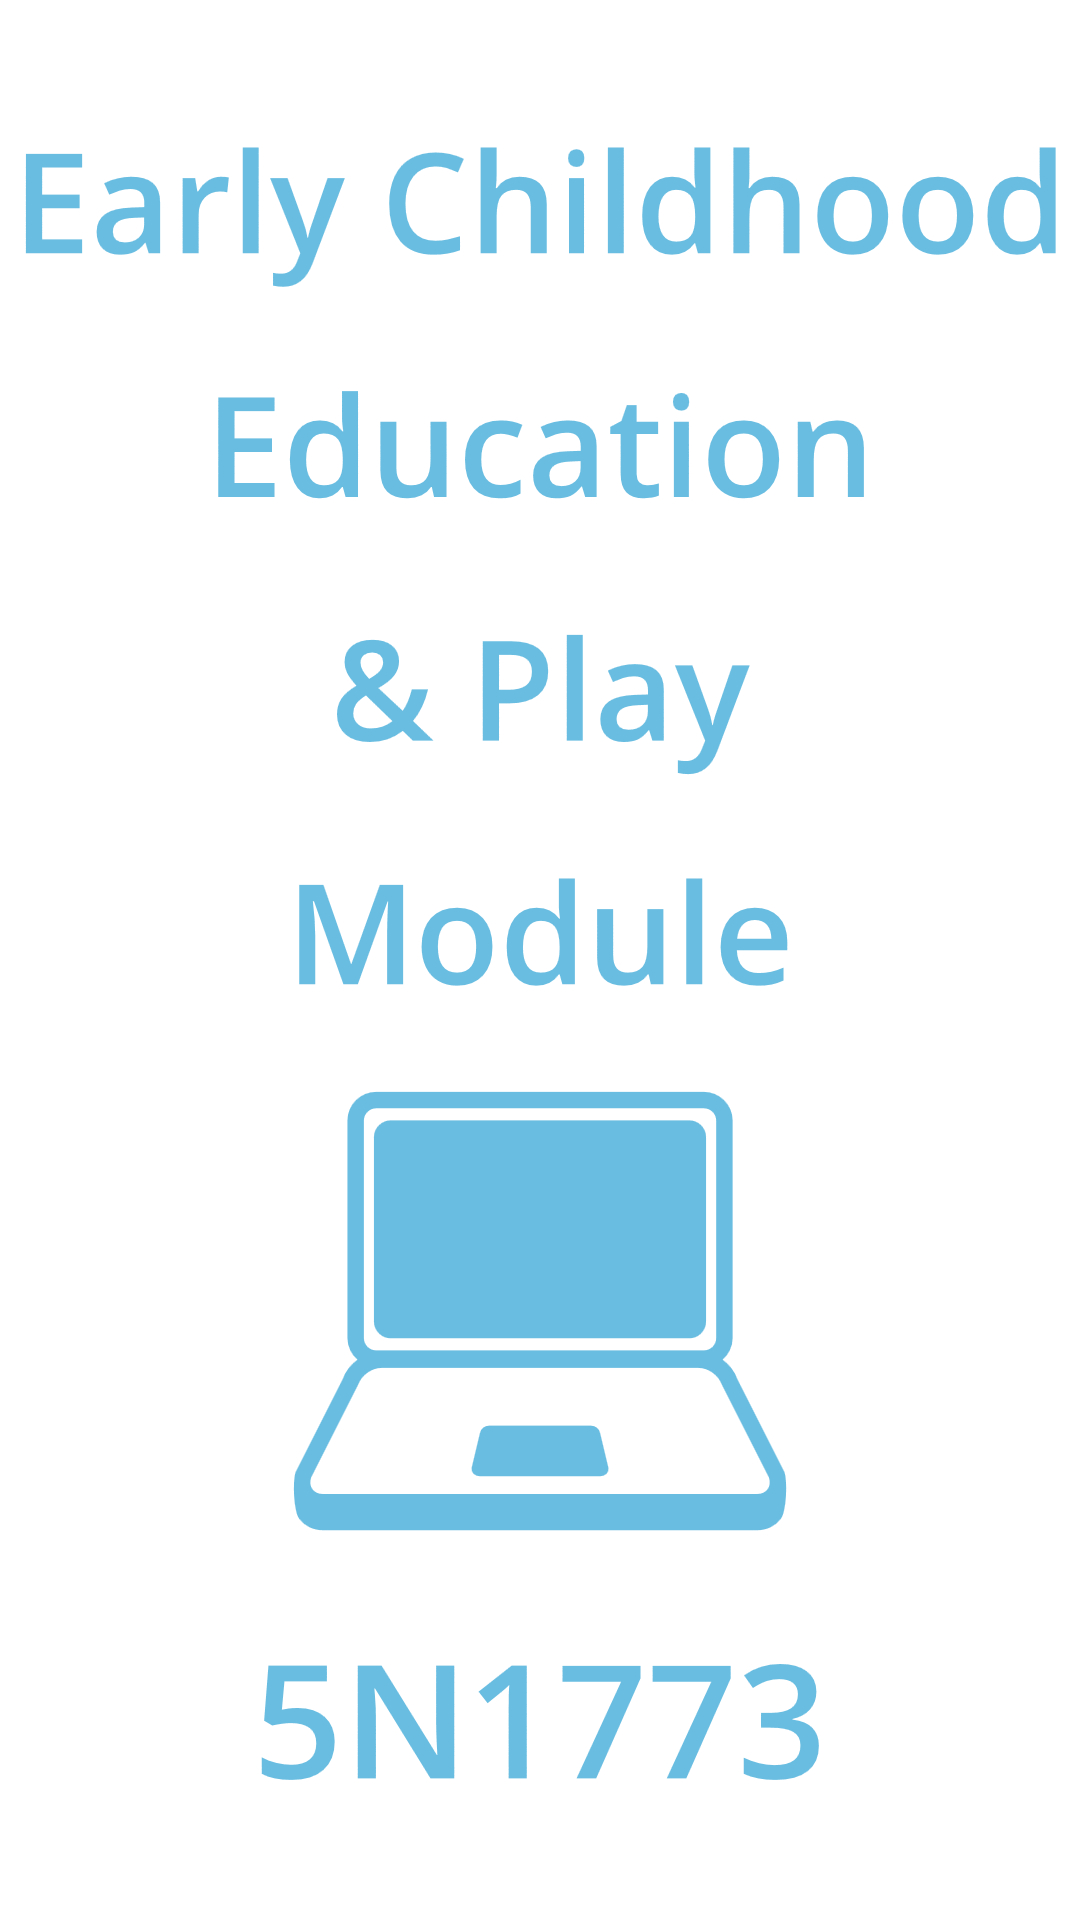 early childhood education & play